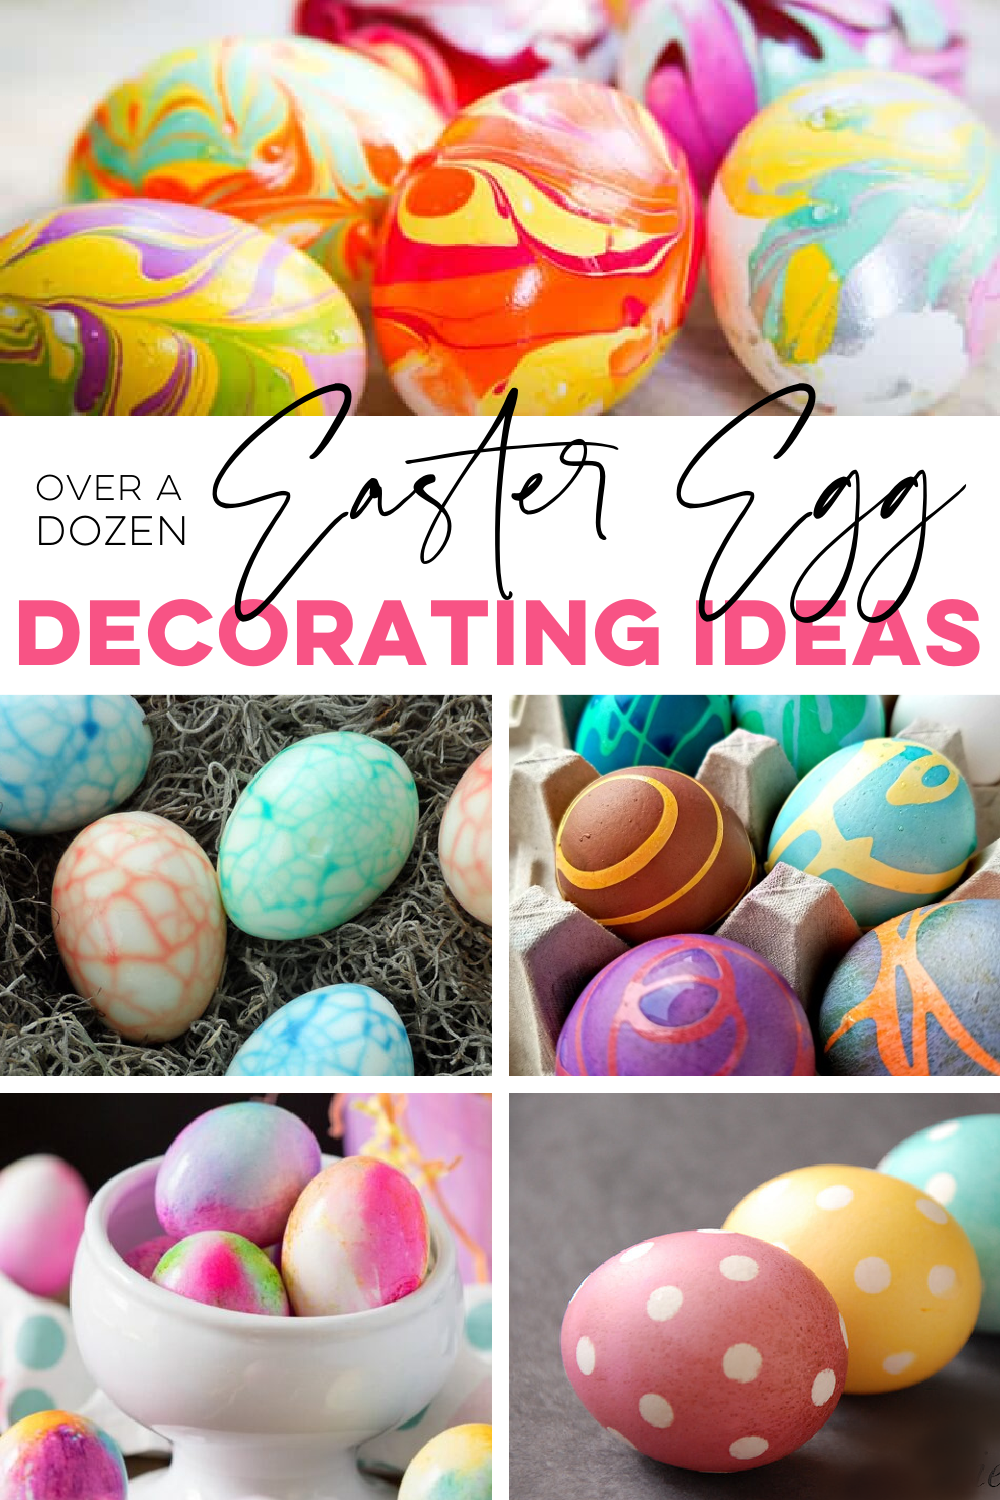 Picture collage of egg decorating ideas included in the post.